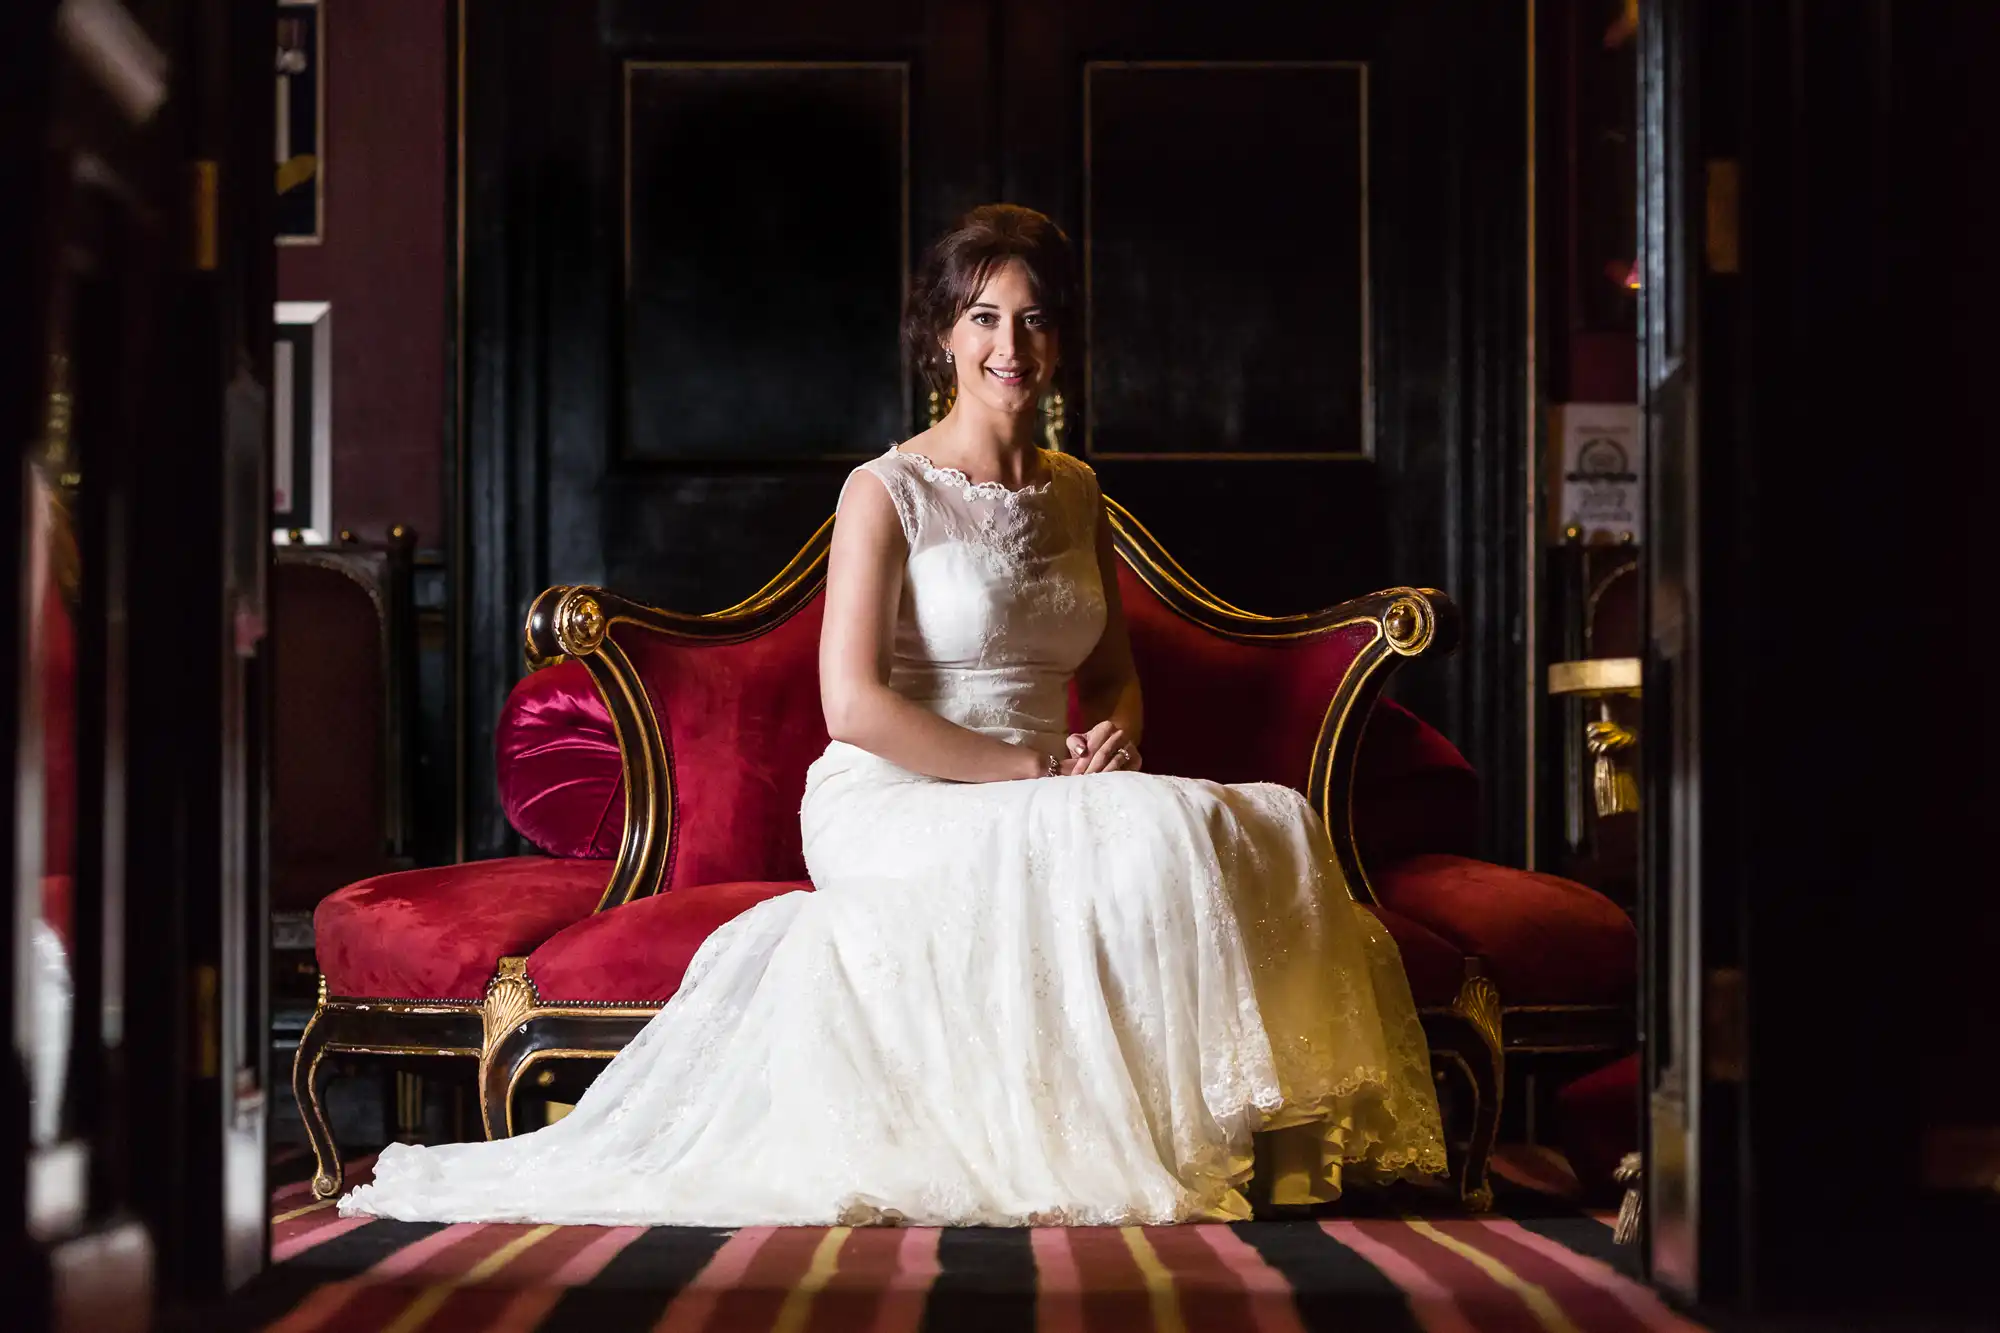 wedding photographer questions - bride sitting at Prestonfield House. A bride in a white lace wedding dress is seated on a red velvet sofa, smiling at the camera. The room has dark walls and ornate furnishings.